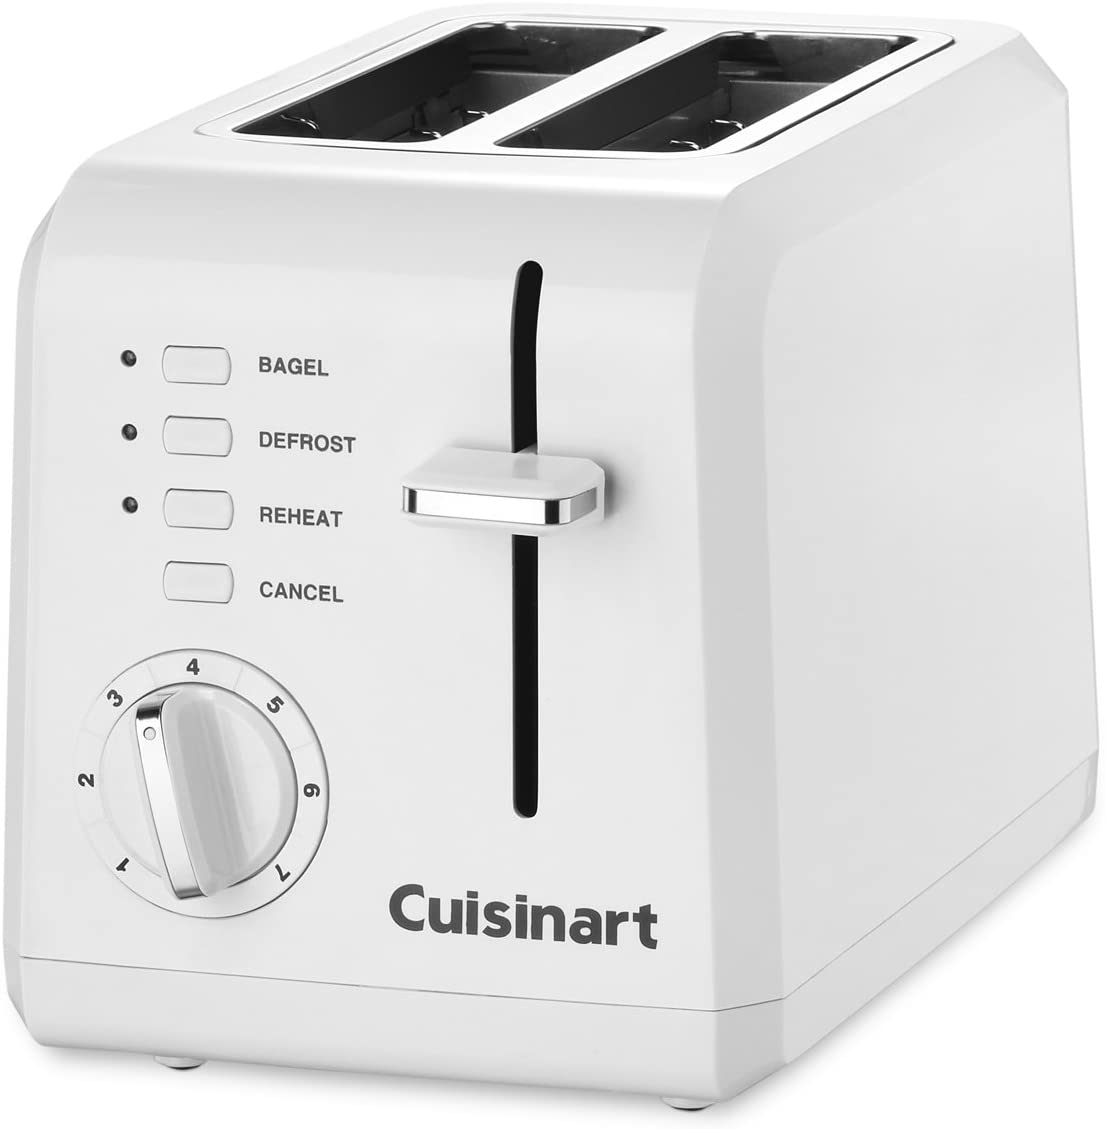 Cuisinart CPT-122FR Two Slice Compact Toaster White - Certified Refurbished